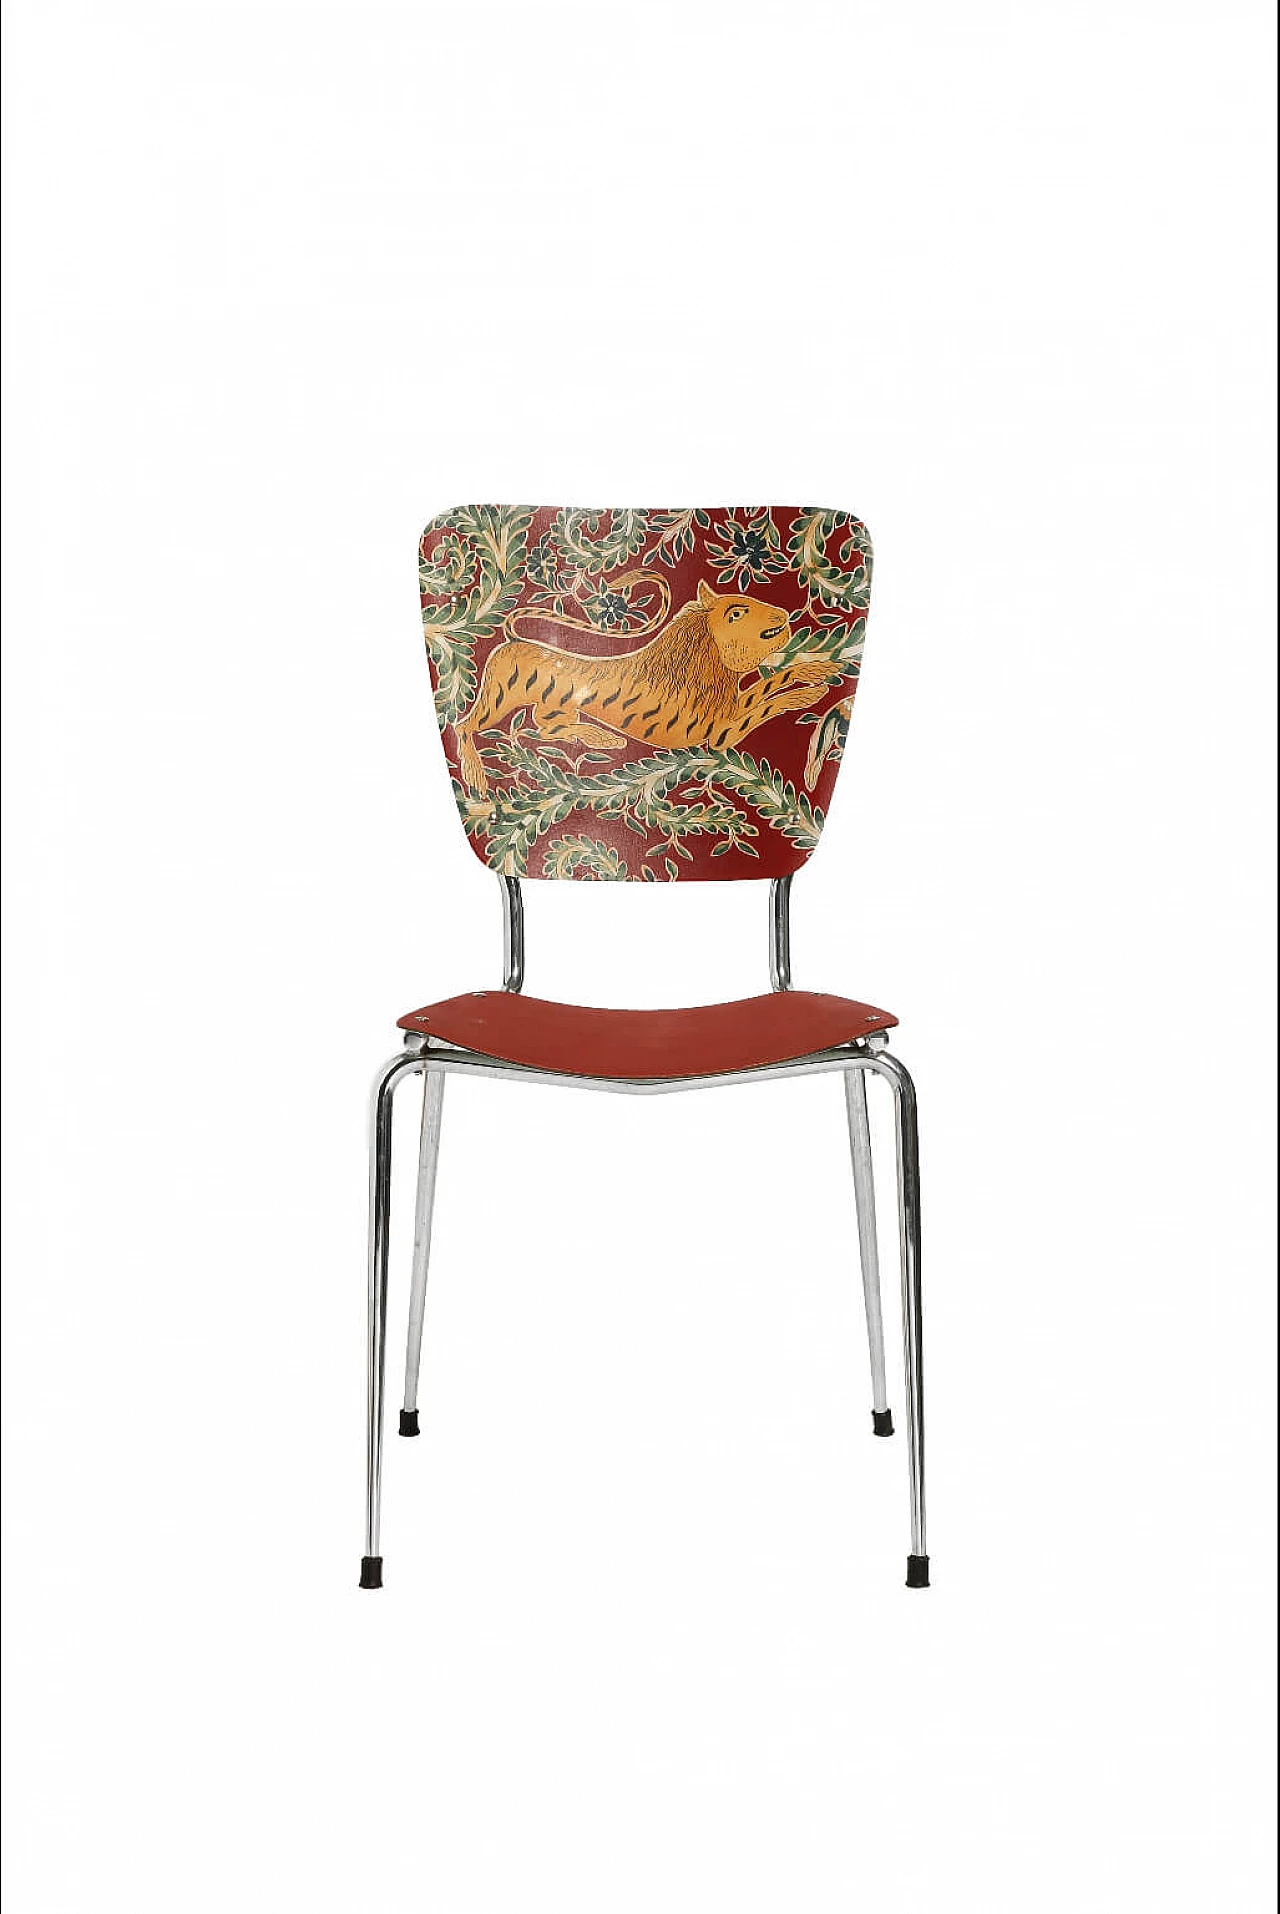 Laminated chair with resinated fabric, 1970s 1221006